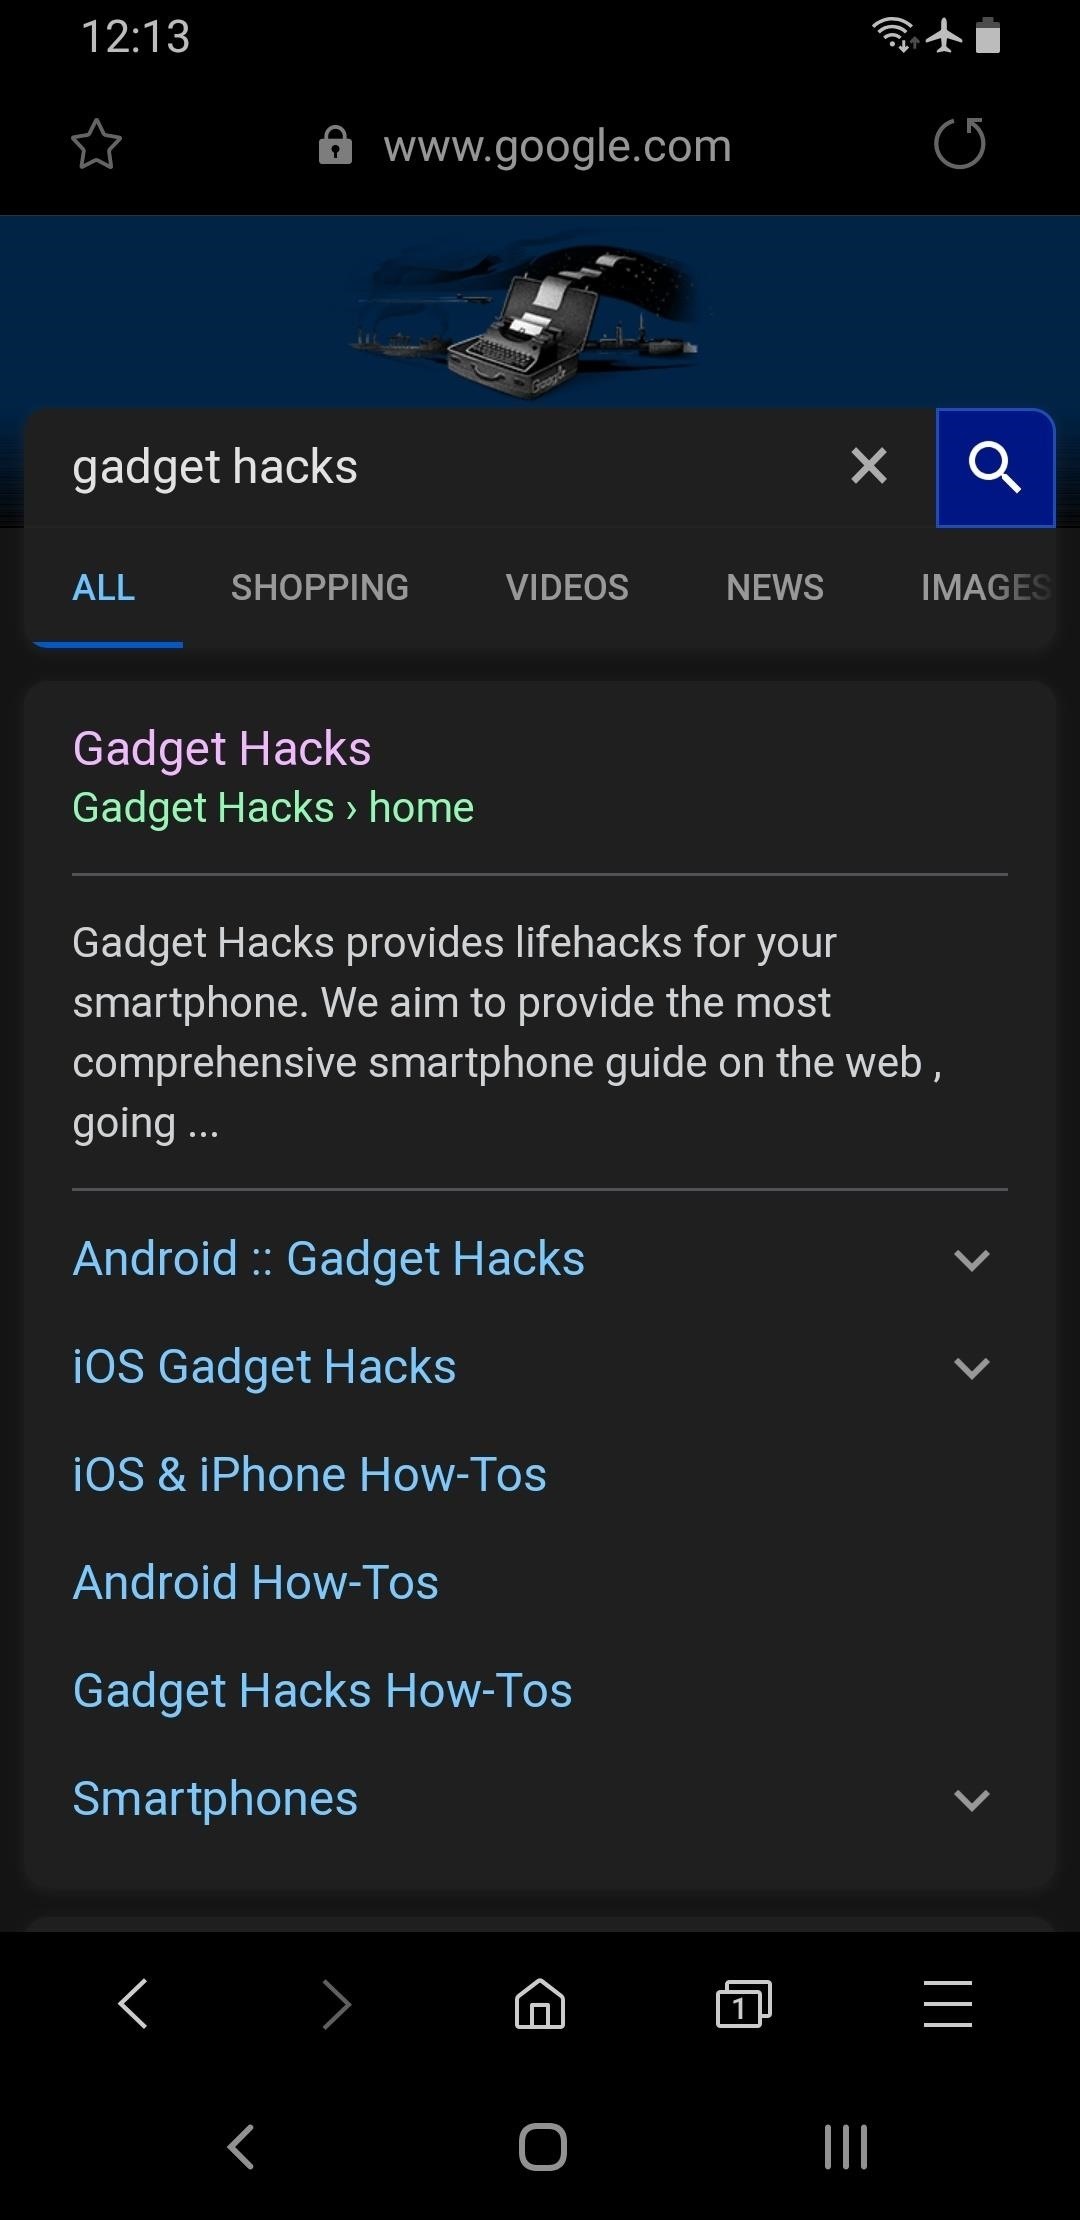 Samsung's One UI Update Makes Internet Browsing Way Better at Night